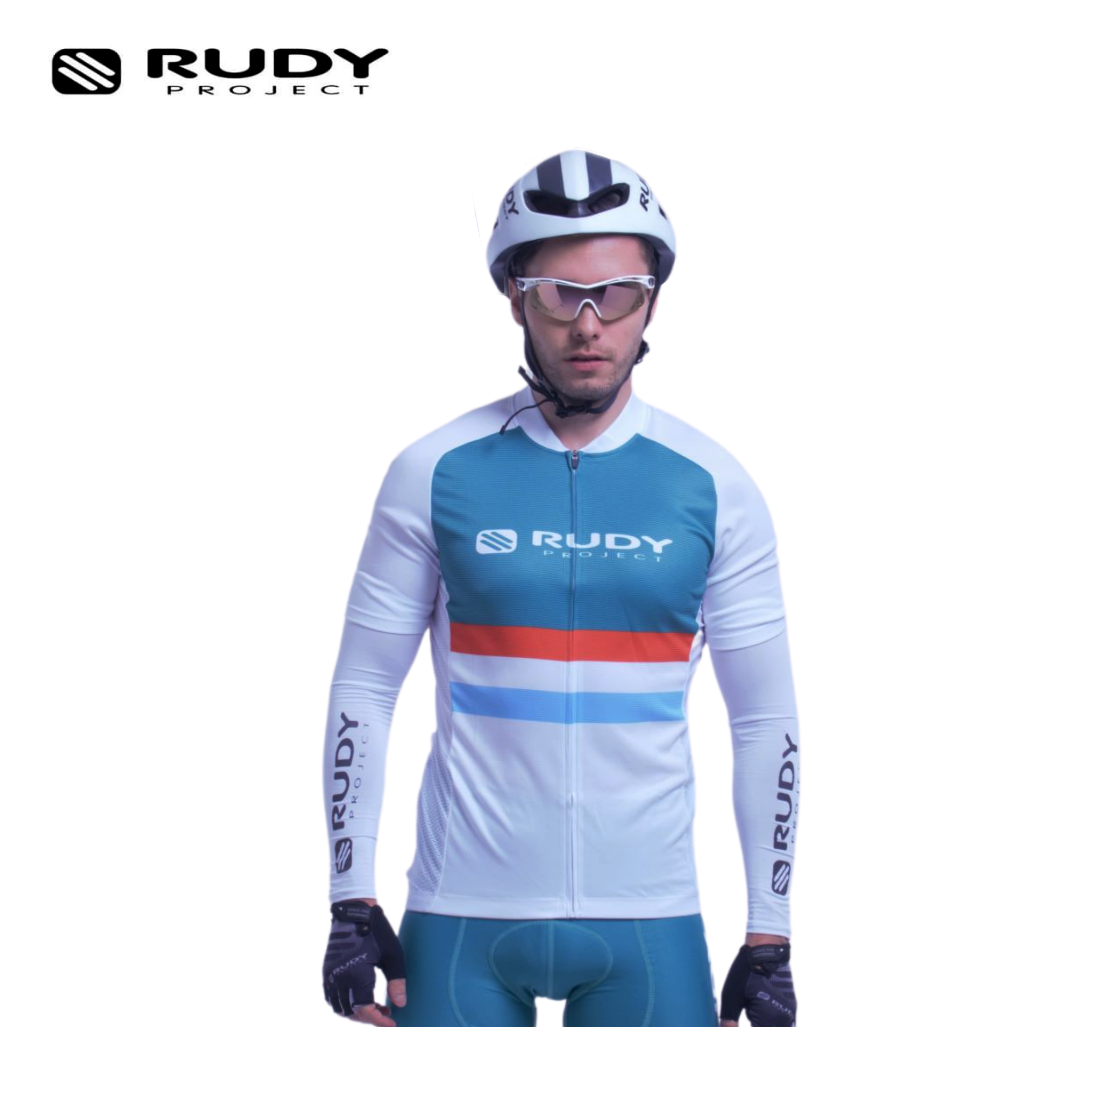 Rudy Project Mens Cycling Jersey Vintage in Jade Green - White Model 5